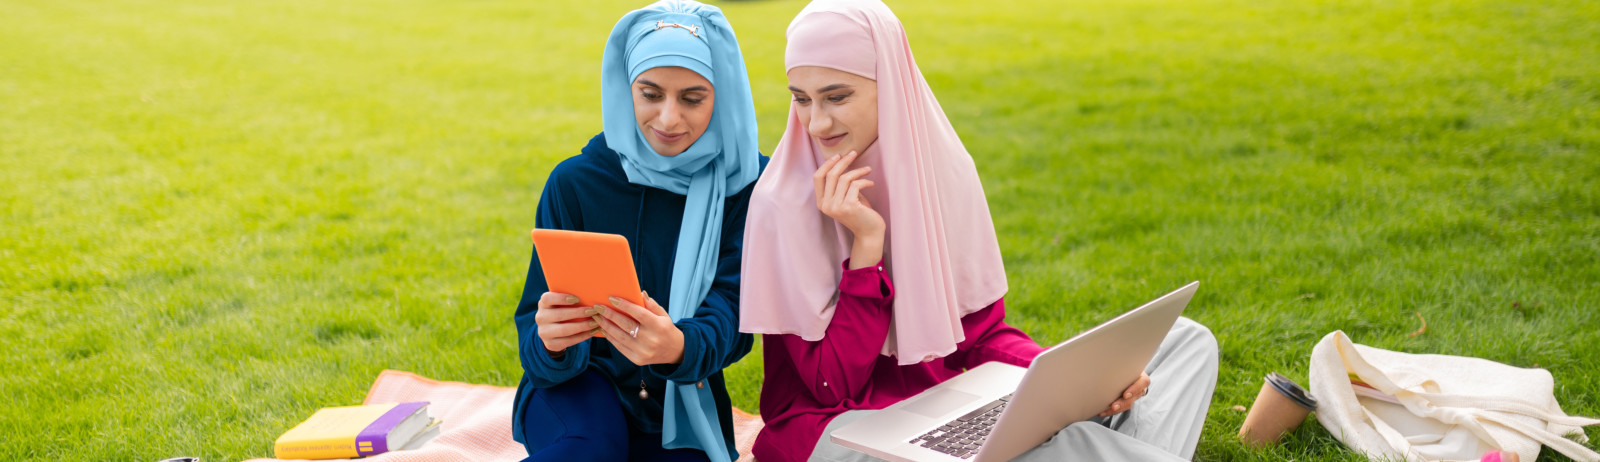 Two female IELTS test takers wearing hijab sits on the lawn and prepares for IELTS - Middle East